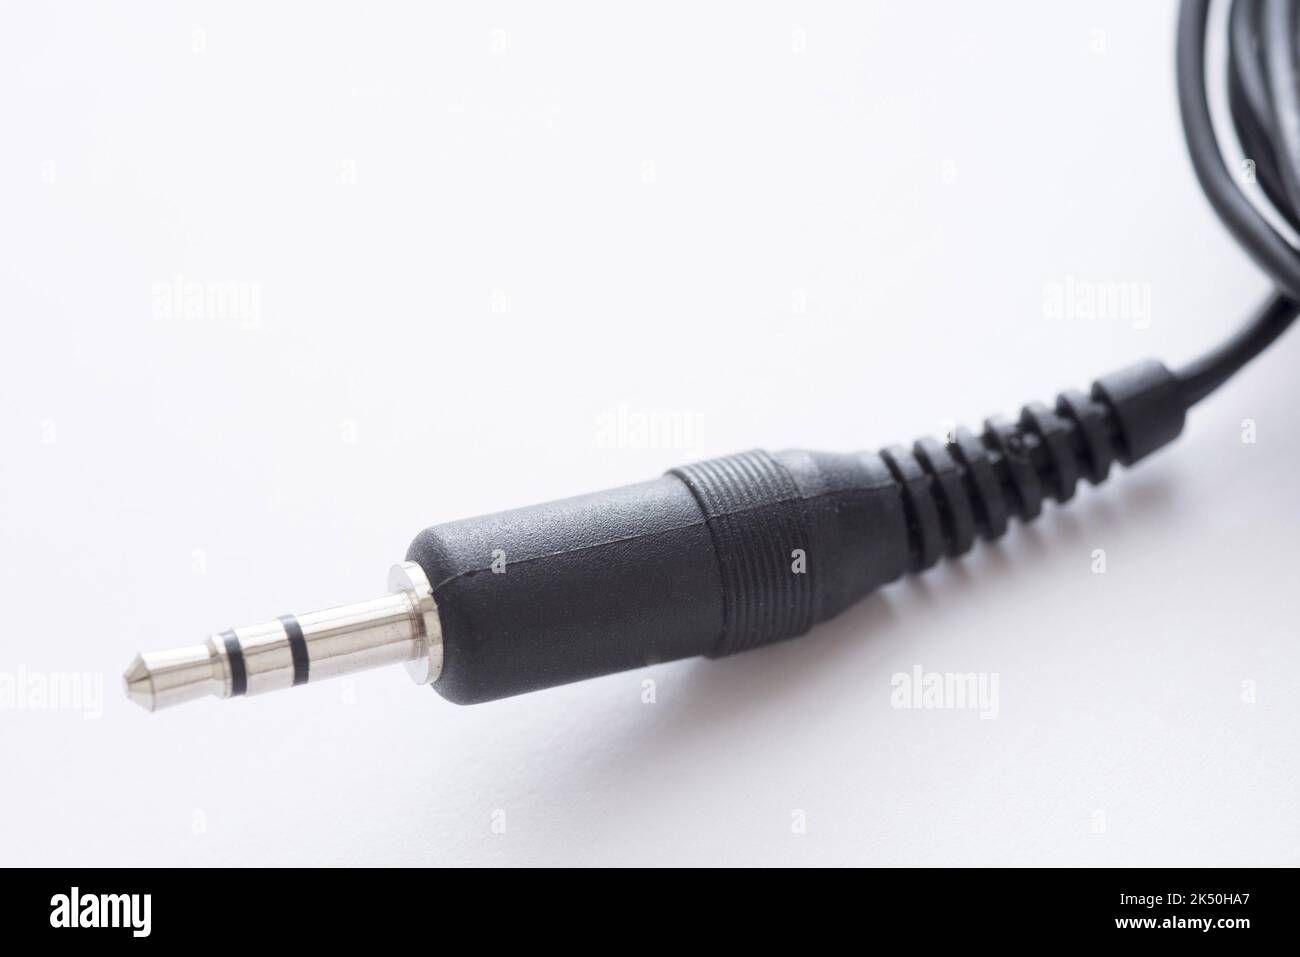 Audio jack 3.5 mm stereo plug with black cord in plastic body close-up on white background with copy space Stock Photo